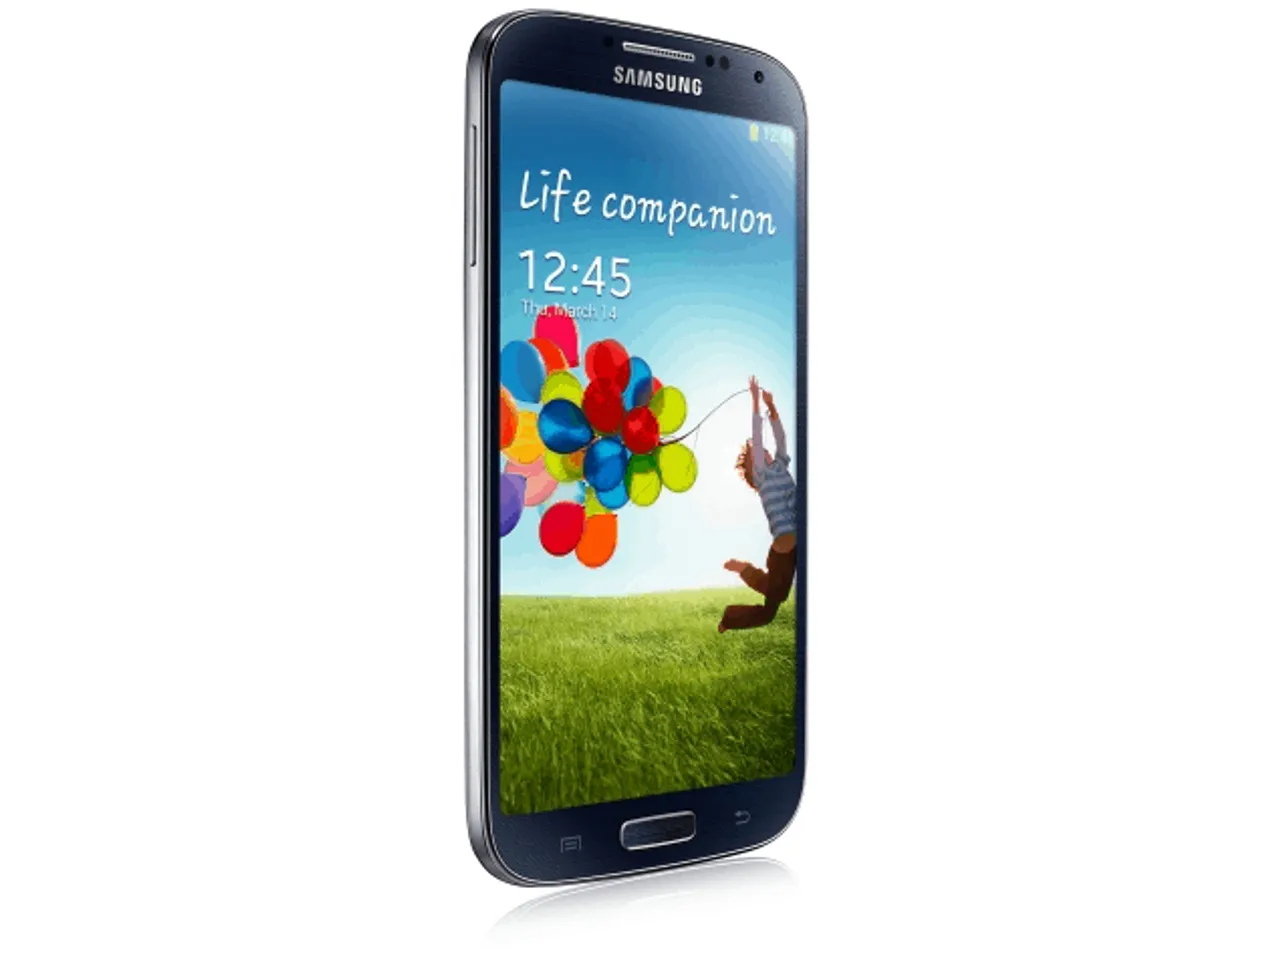 Samsung Galaxy S4 price slashed to Rs 17,999